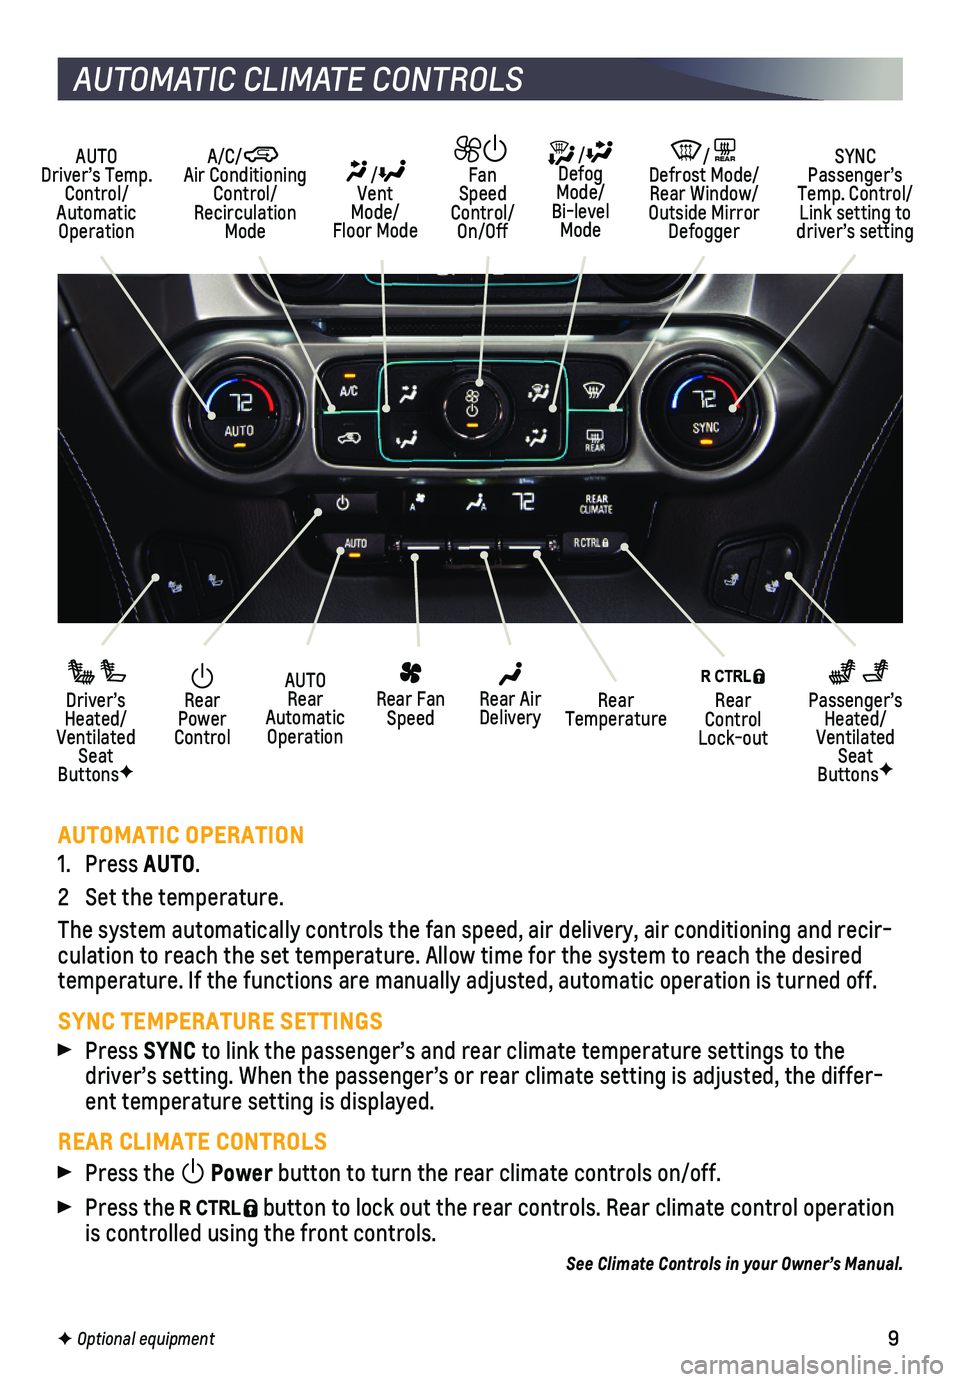 CHEVROLET TAHOE 2019  Get To Know Guide 9
HEAD-UP DISPLAY
AUTOMATIC OPERATION
1. Press AUTO.
2 Set the temperature. 
The system automatically controls the fan speed, air delivery, air condi\
tioning and recir-culation to reach the set tempe